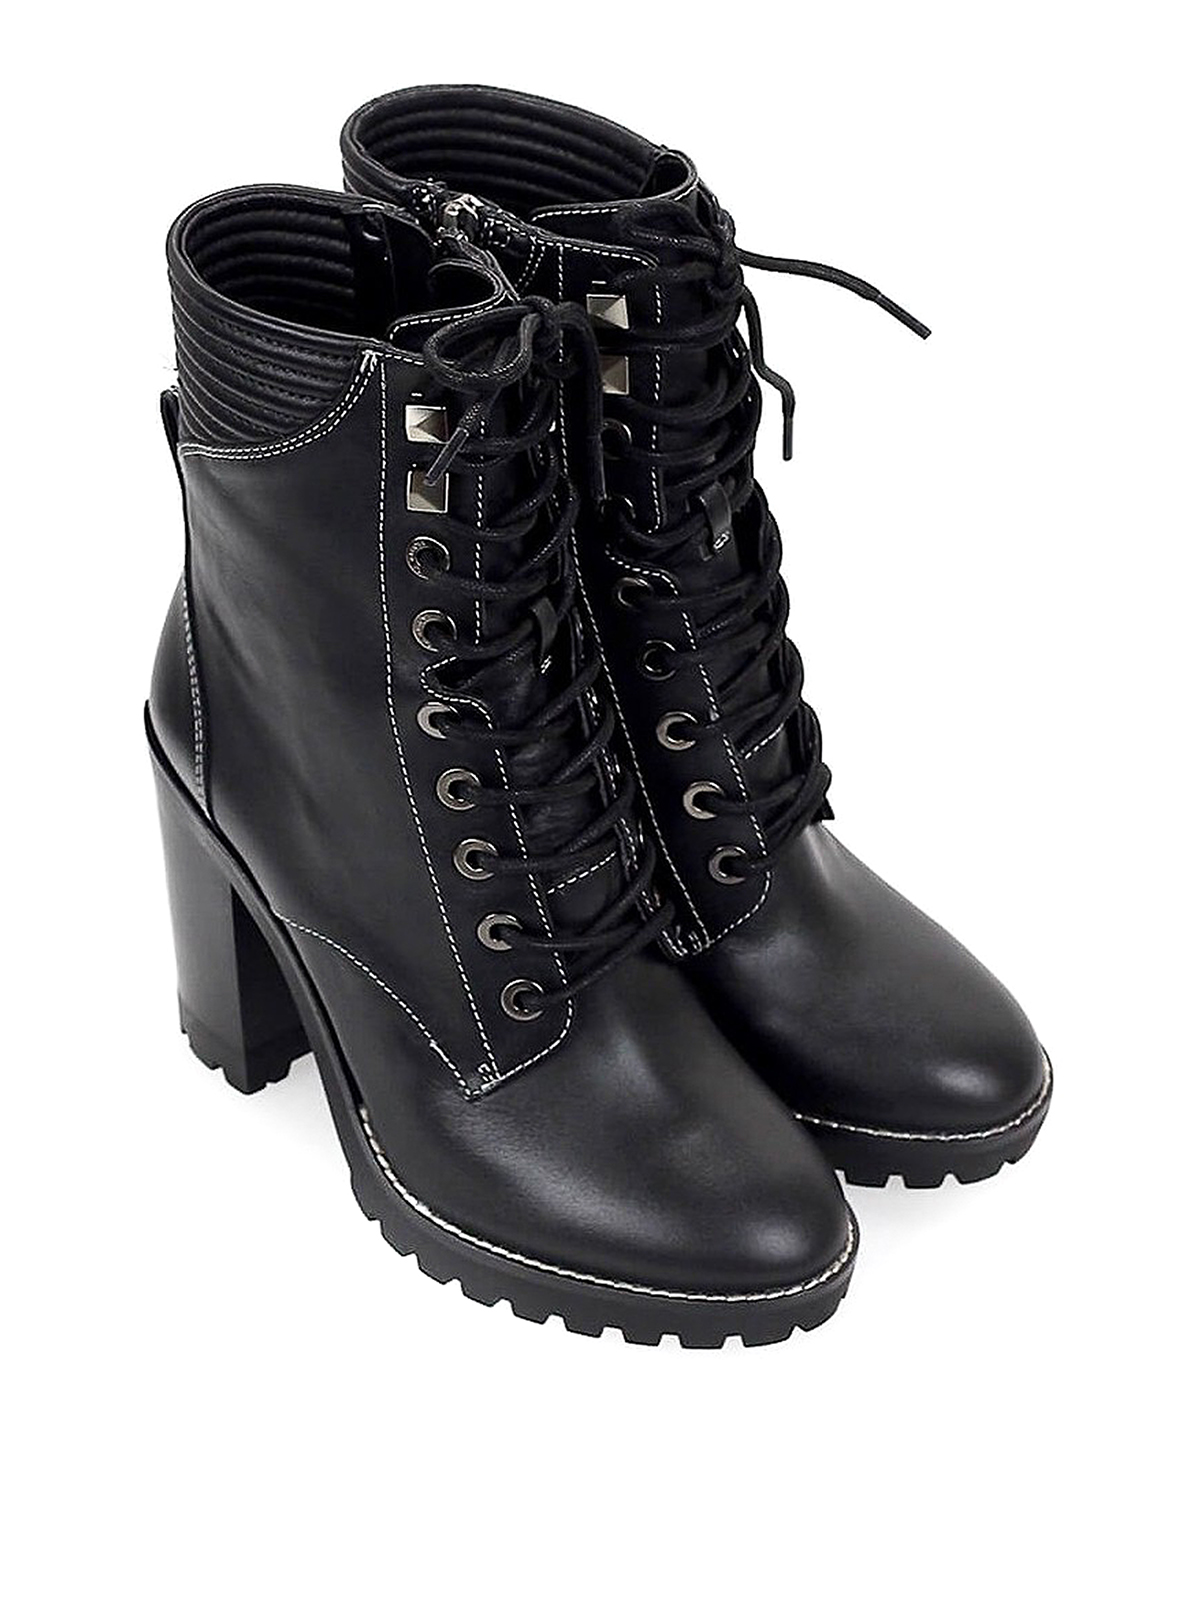 michael kors lace up booties